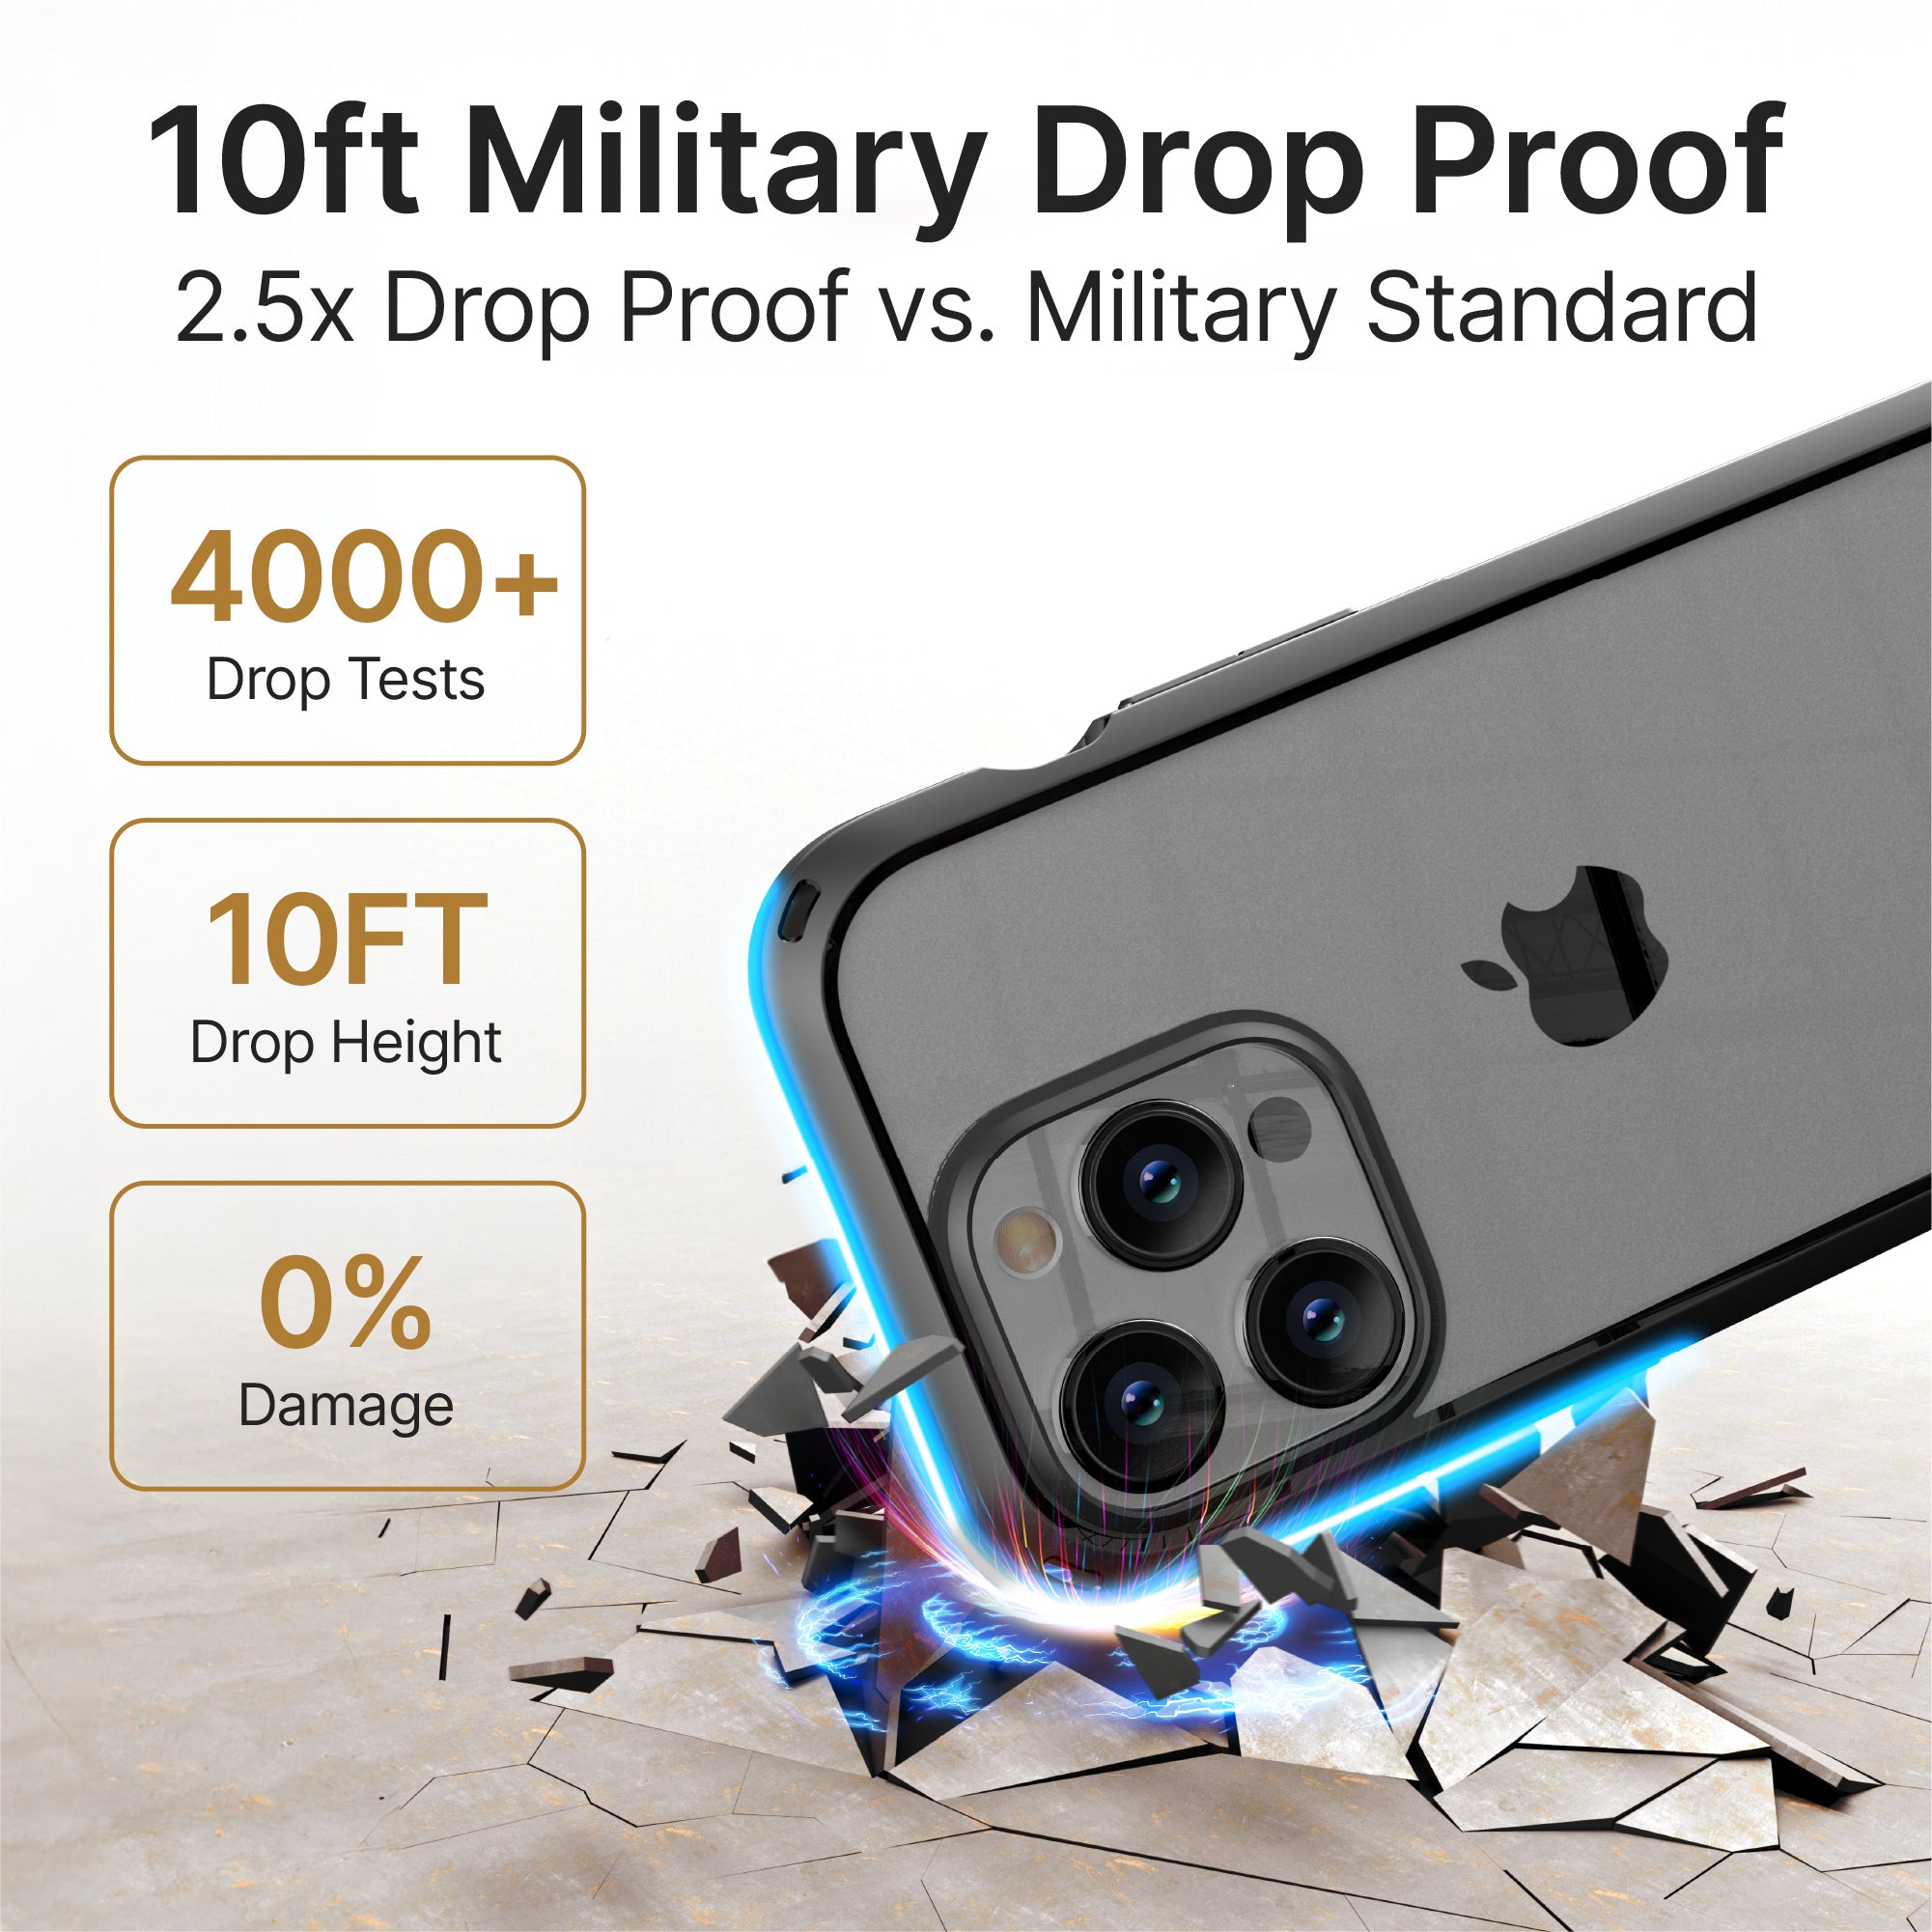 Catalyst iphone 15 series influence case iphone 15 pro max in midnight black colorway showing the durability of the case text reads 10ft military drop proof 2.5 x drop proof vs. military standard 4000+ drop tests 10ft drop height 0% damage